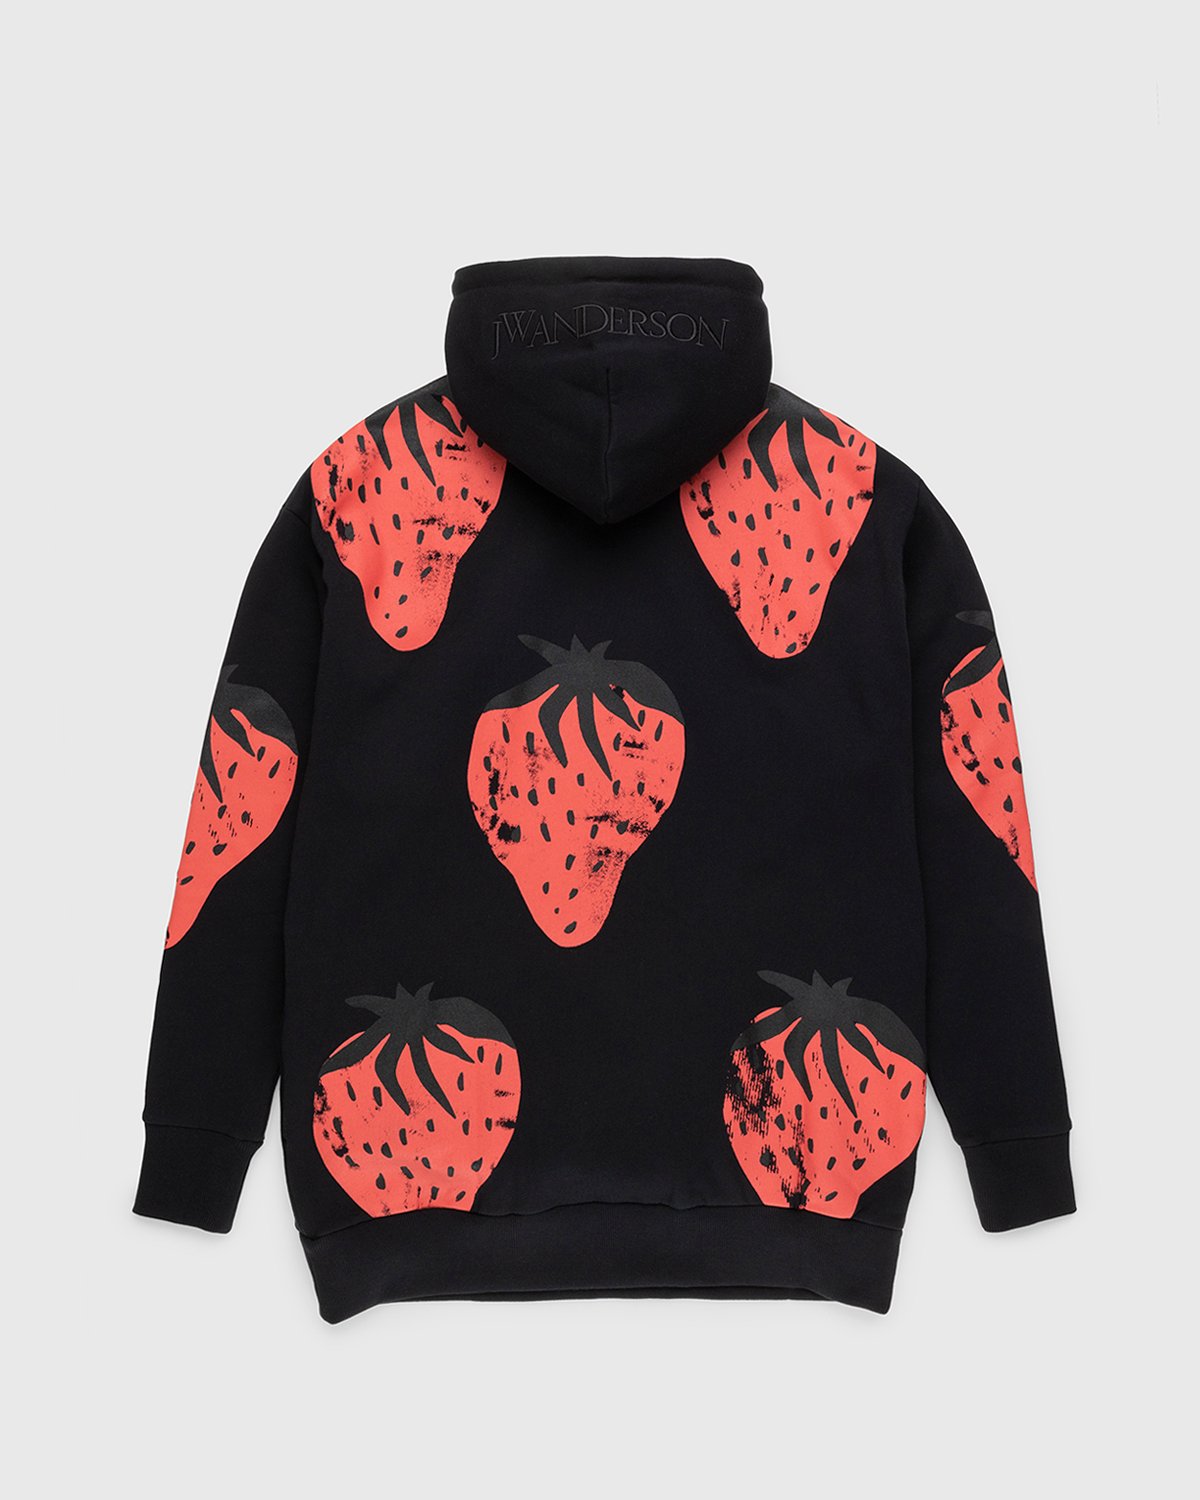 J.W. Anderson - Oversized Strawberry Hoodie Black/Red - Clothing - Black - Image 2